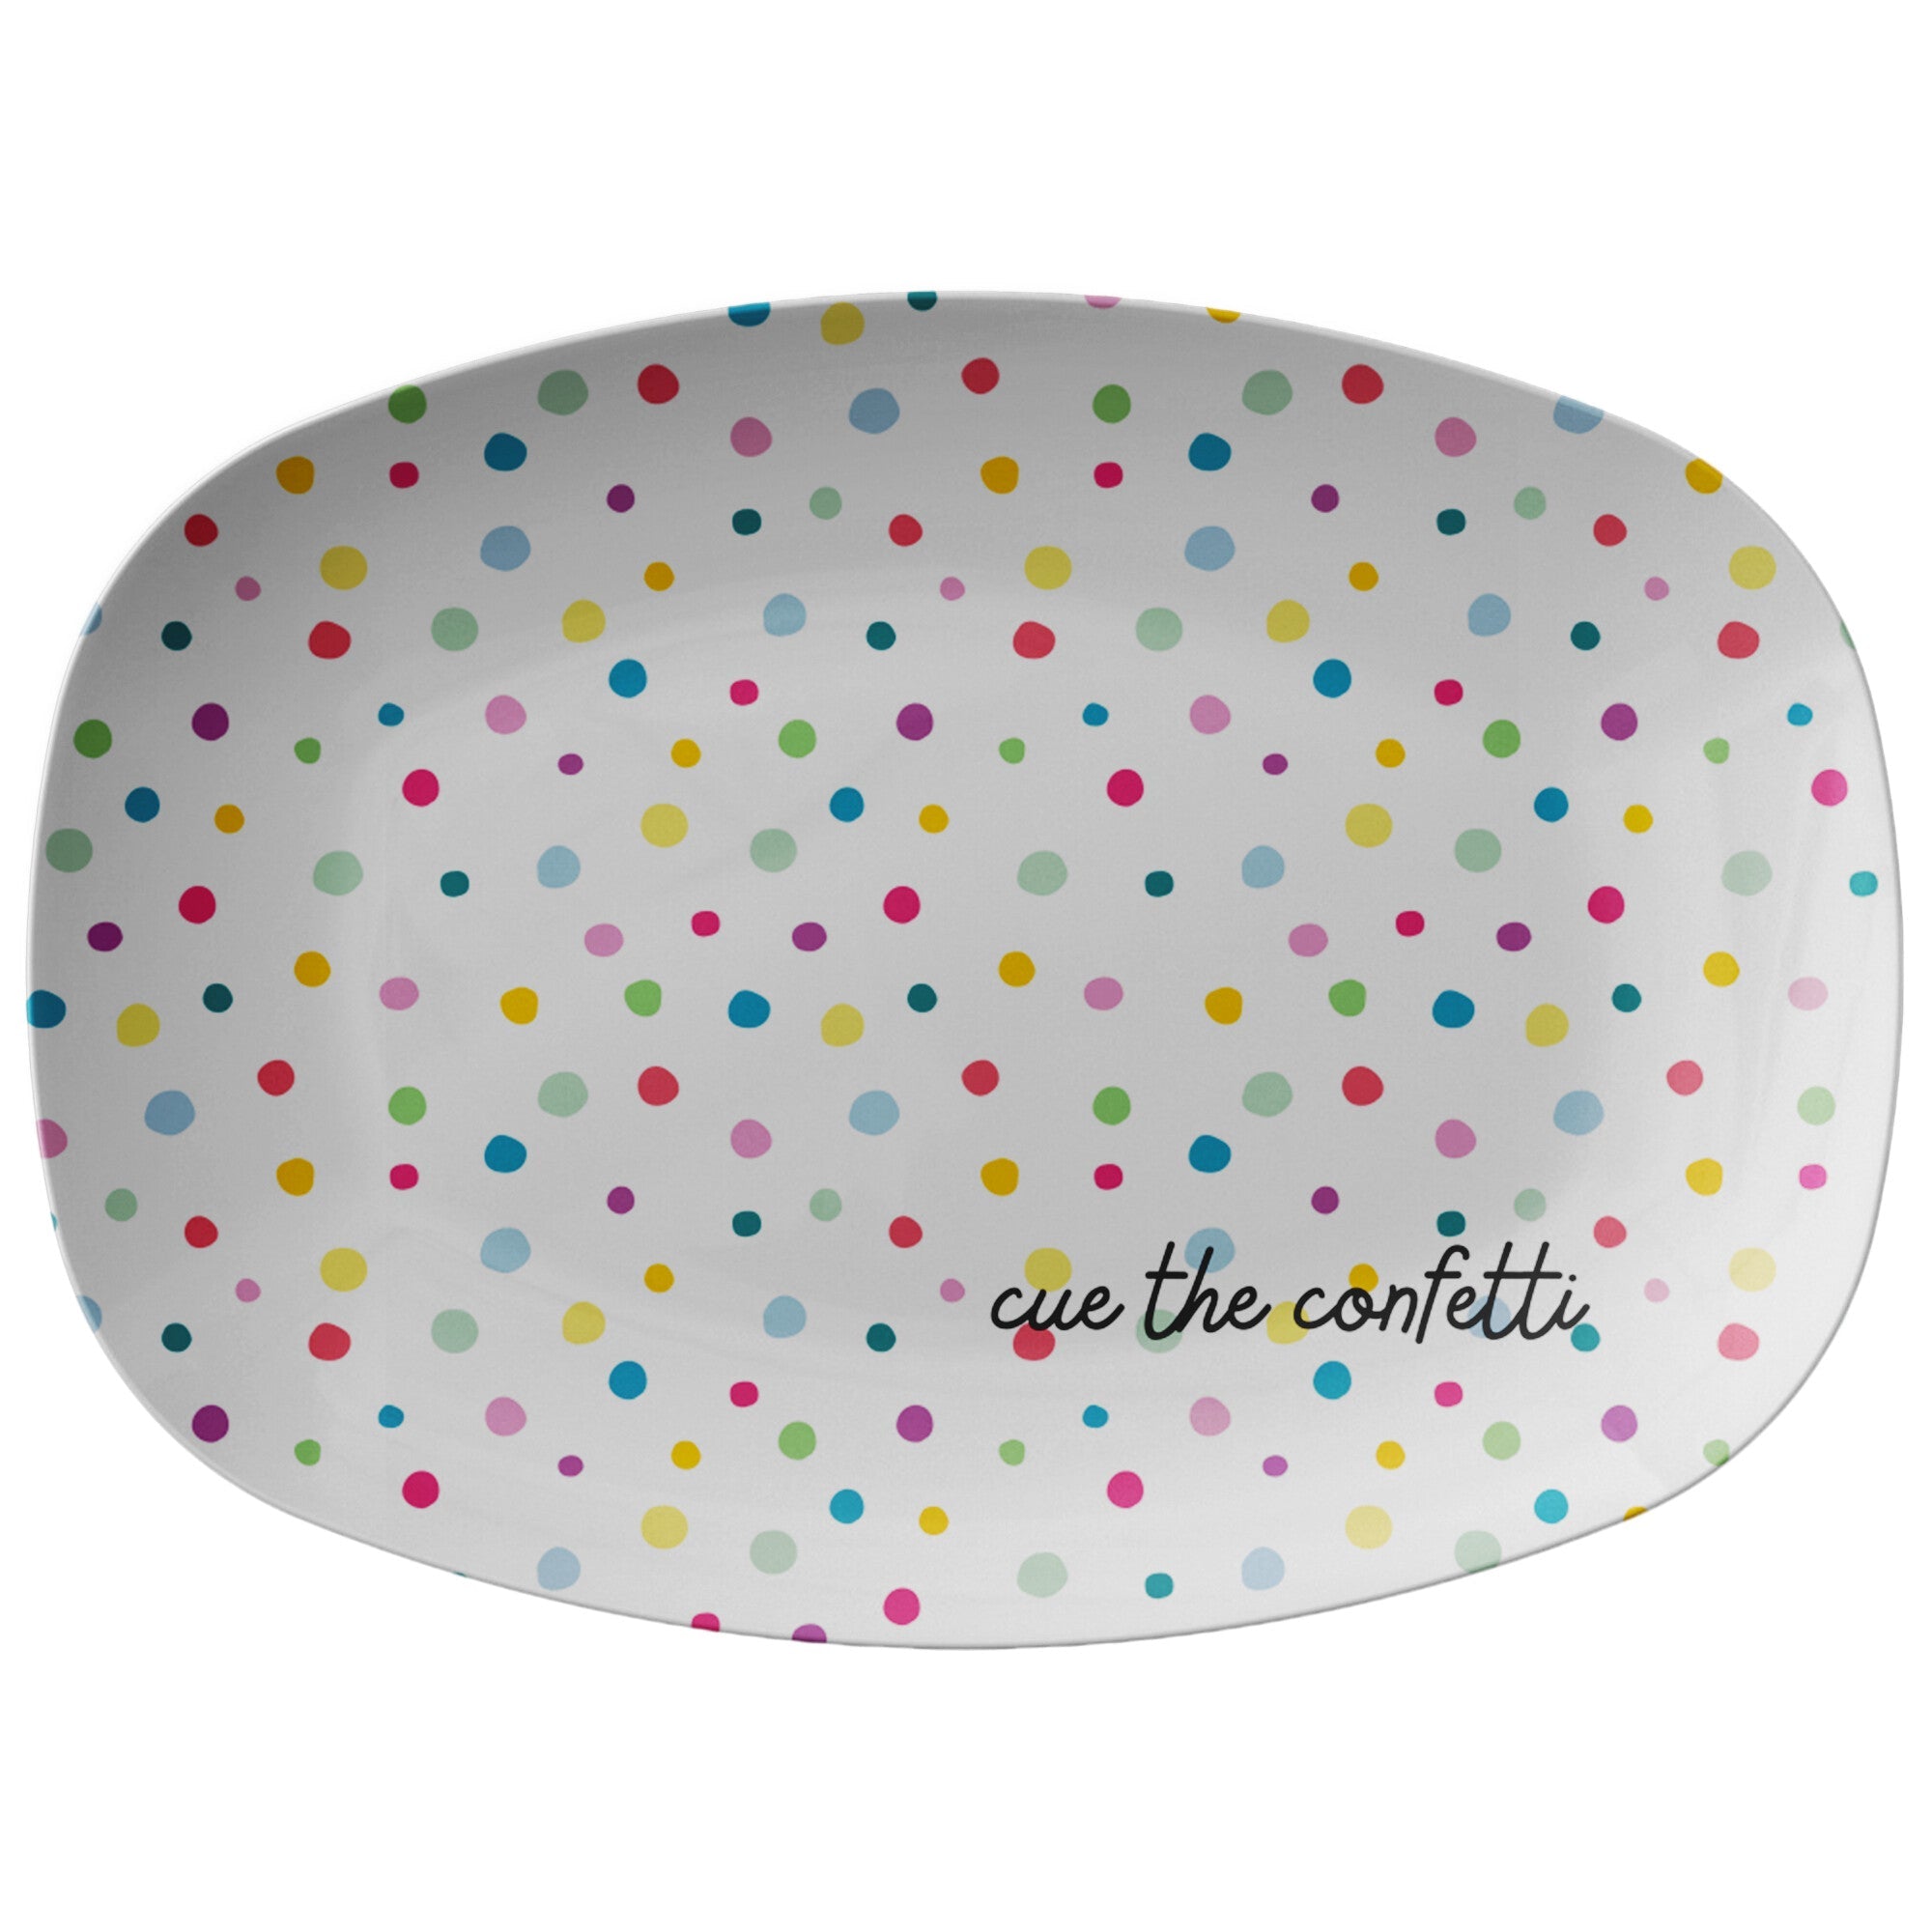 Cue the Confetti 10x14 Serving Platter - The Kindness Cause